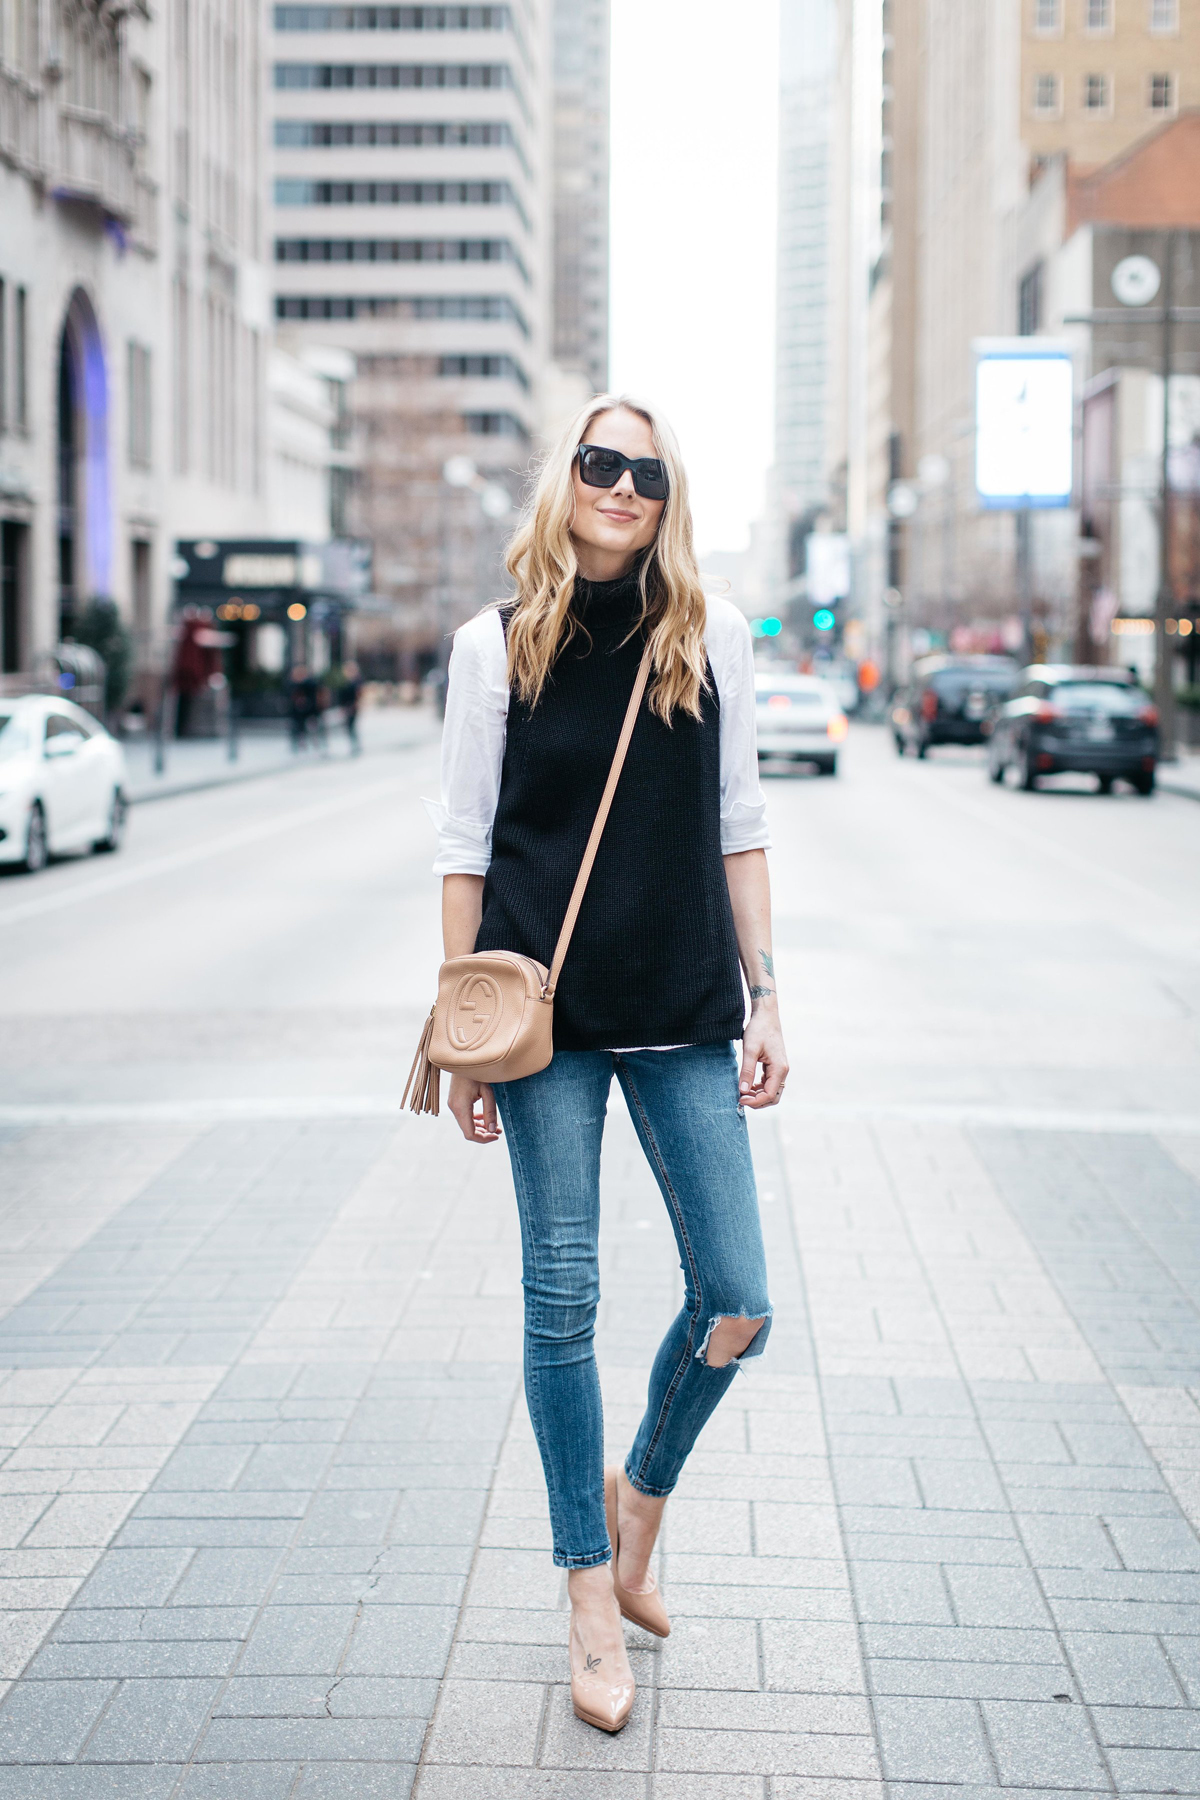 Fall Outfit, Winter Outfit, White Button Down Shirt, Black Sleeveless Turtleneck Sweater, Denim Ripped Skinny Jeans, Gucci Soho Handbag, Nude Pumps